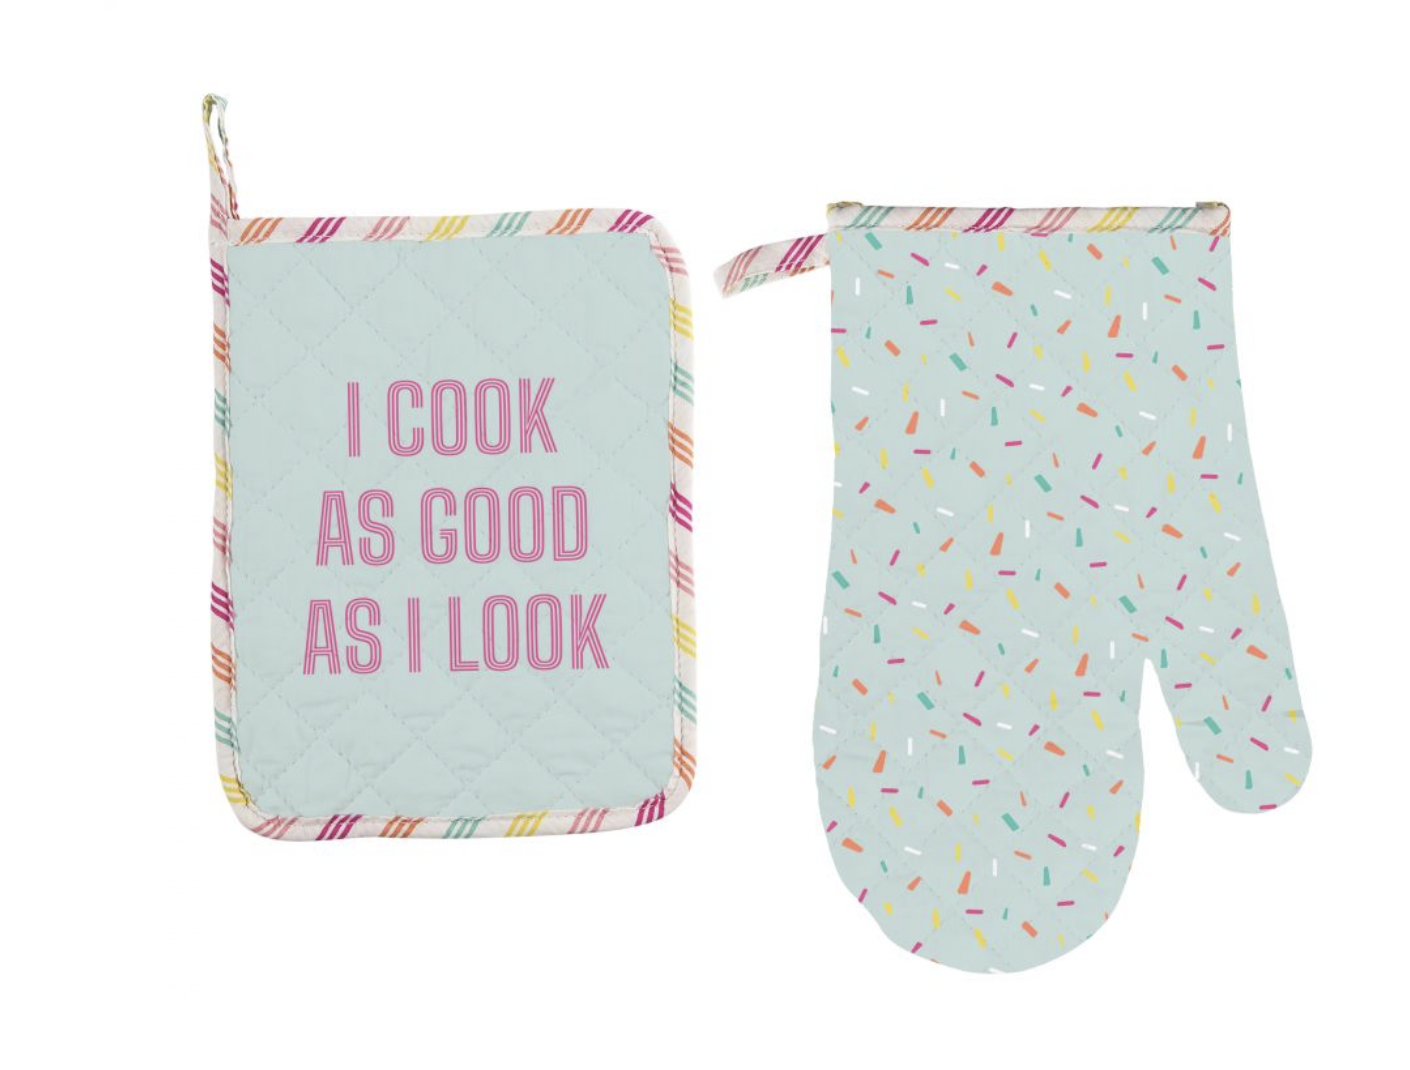 I Cook As Good As I Look Pot Holder